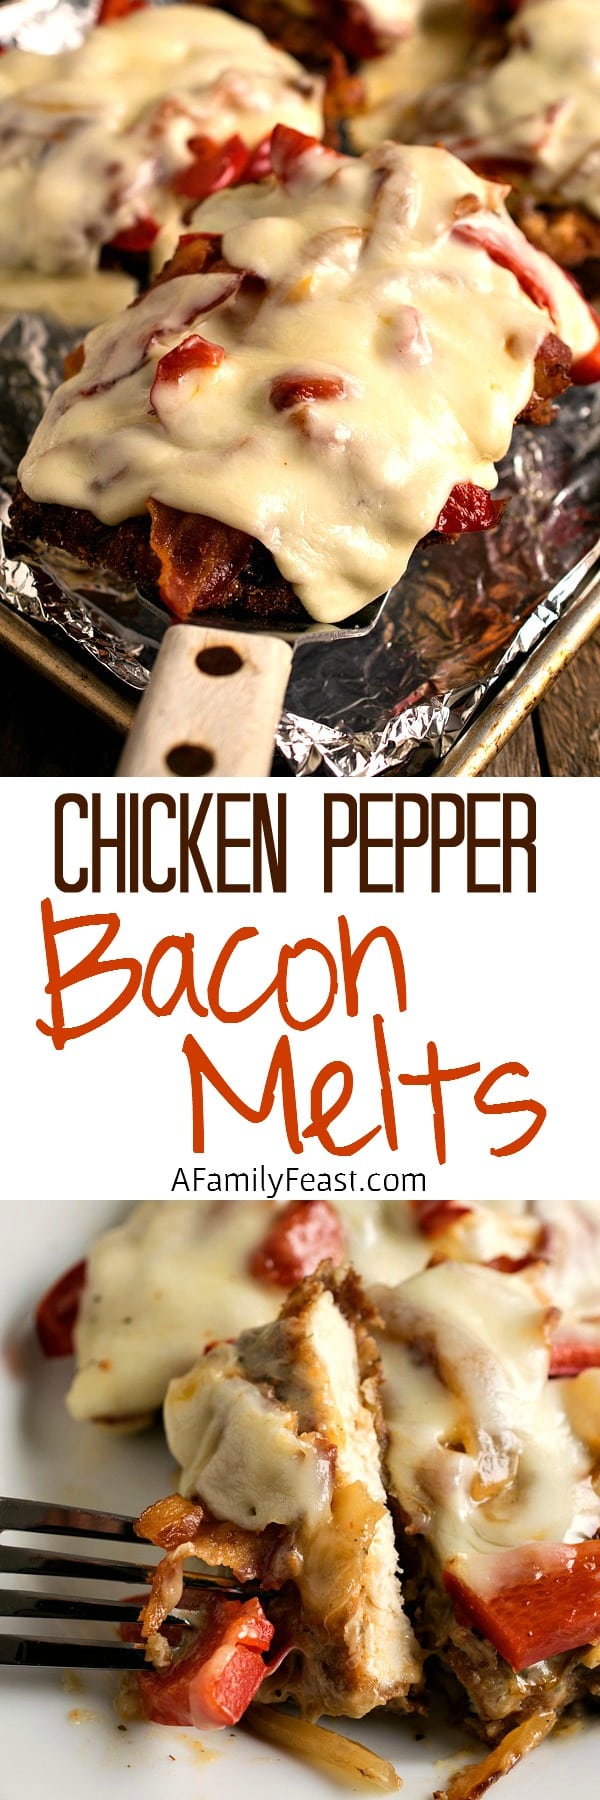 Chicken Pepper Bacon Melts - Tender fried chicken layered with roasted peppers, bacon and cheese! An easy, delicious weeknight meal.